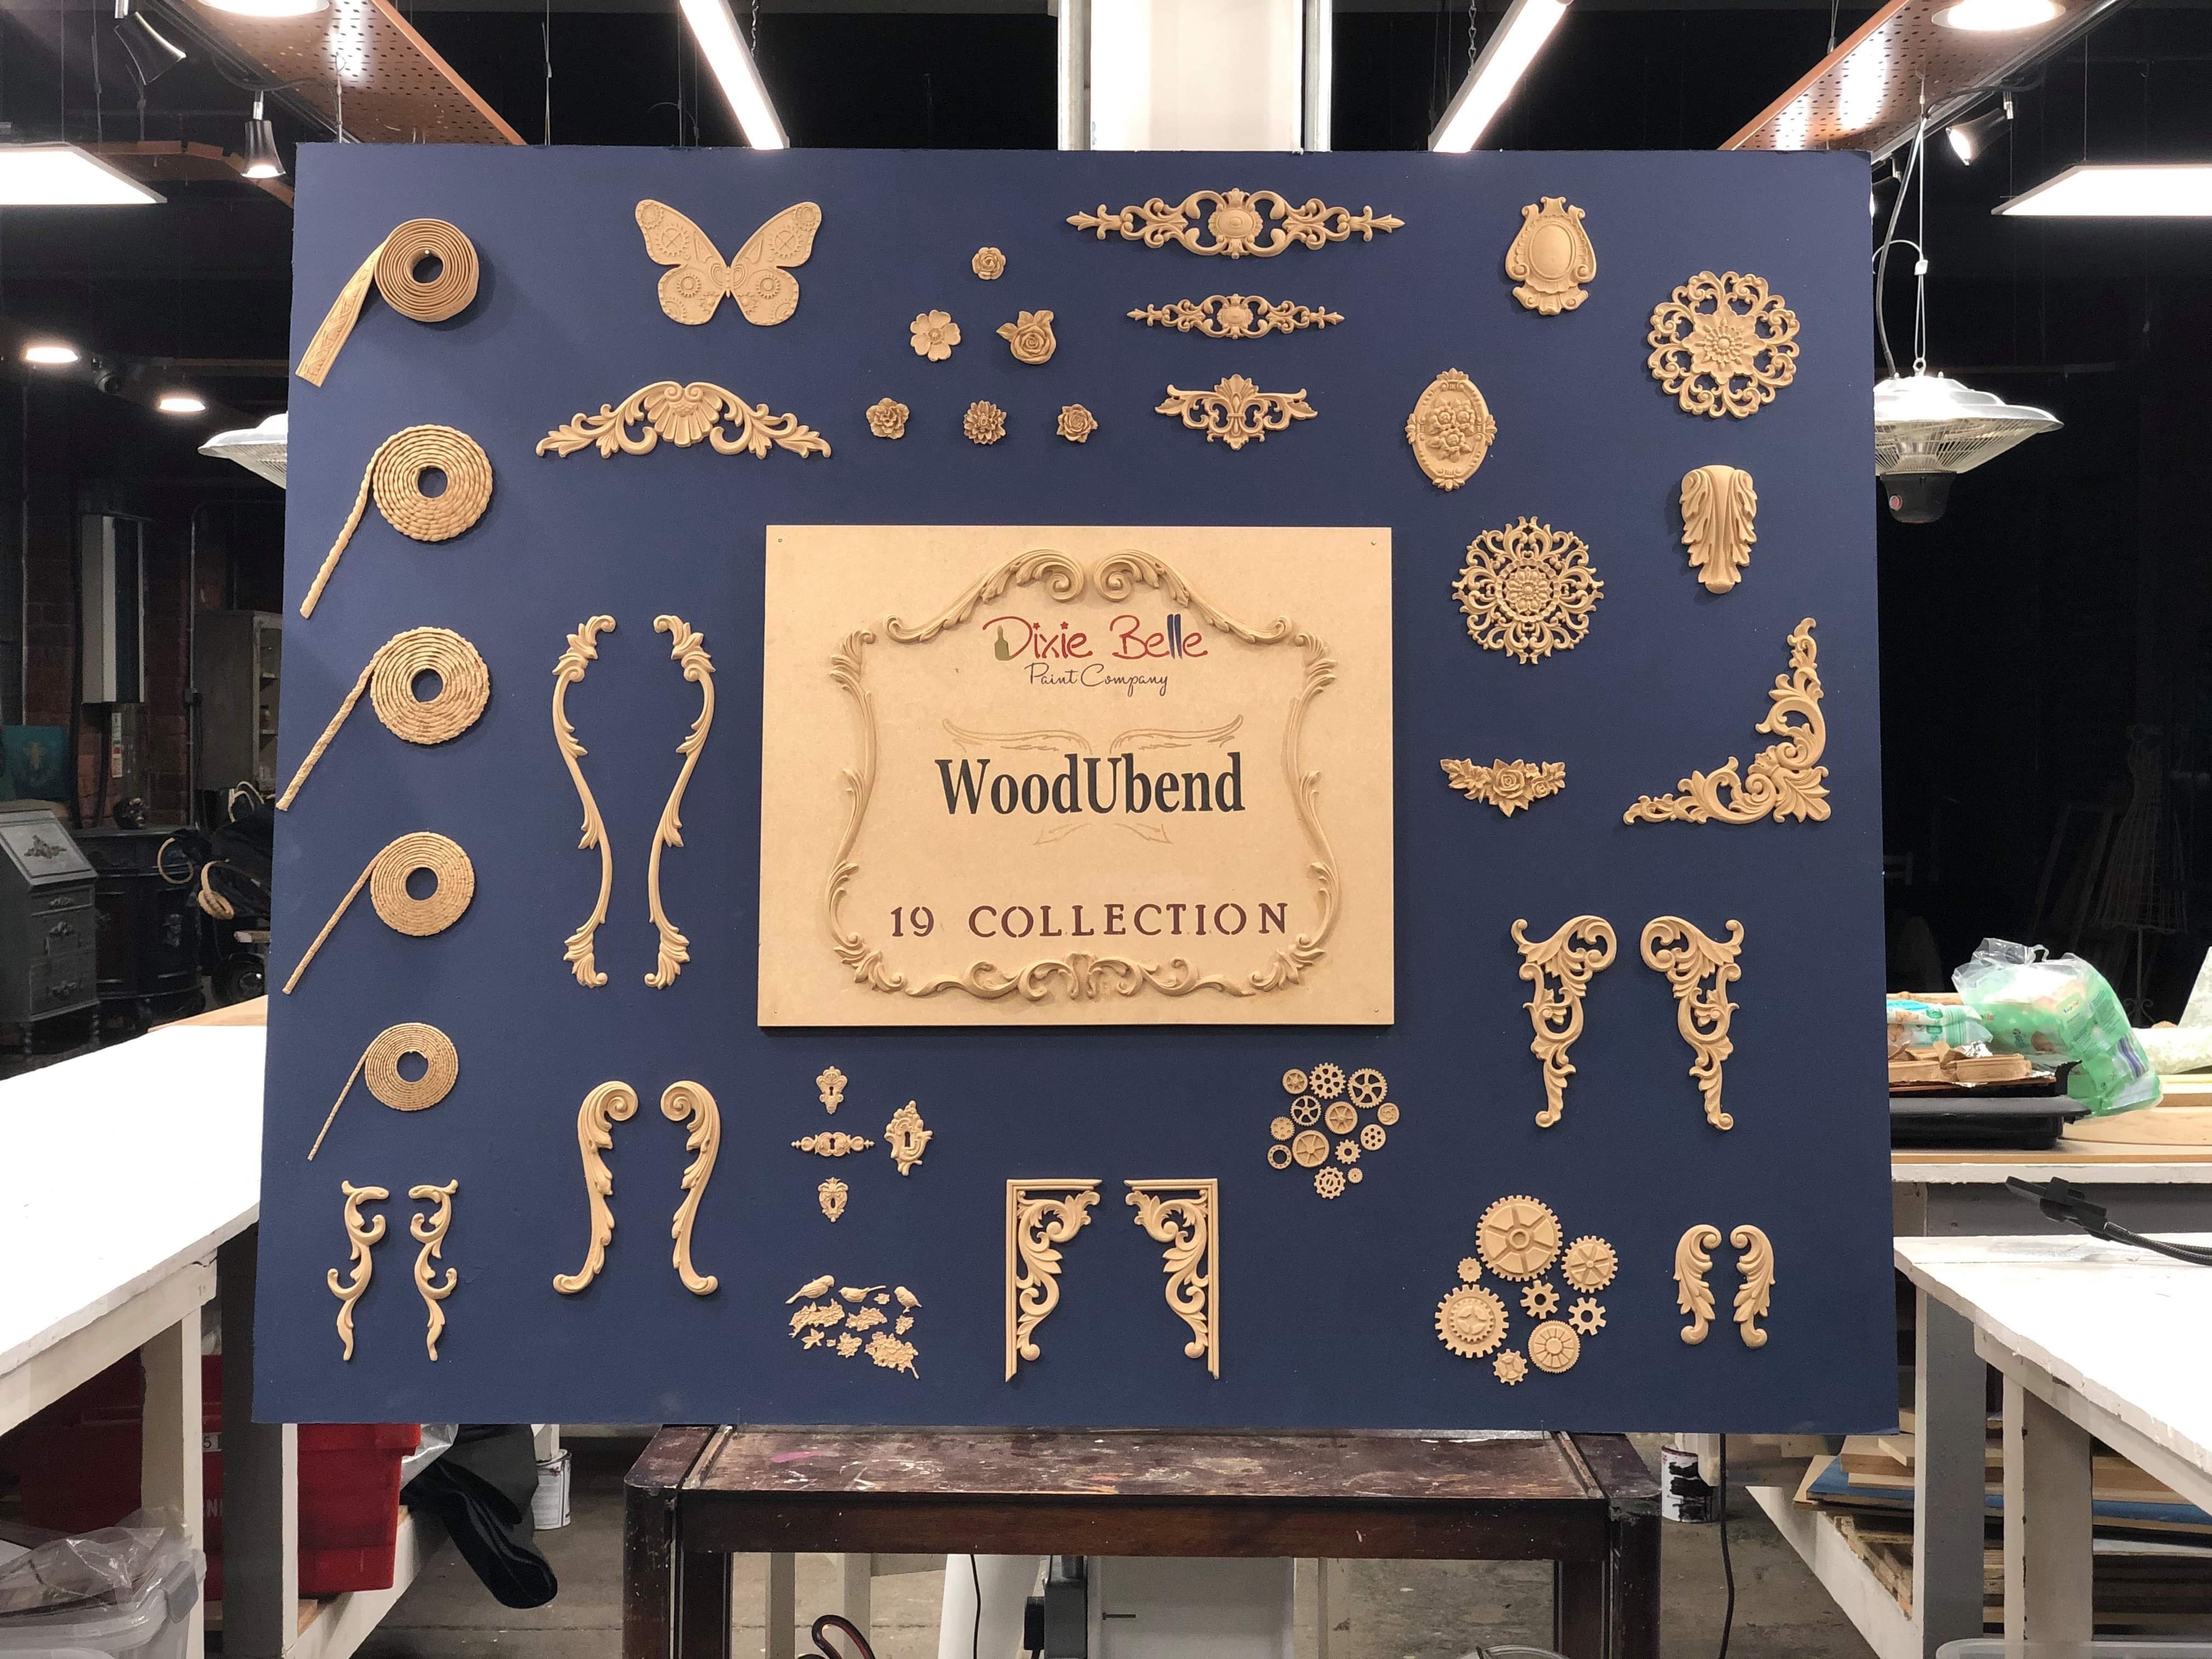 How to Apply WoodUbend Appliques